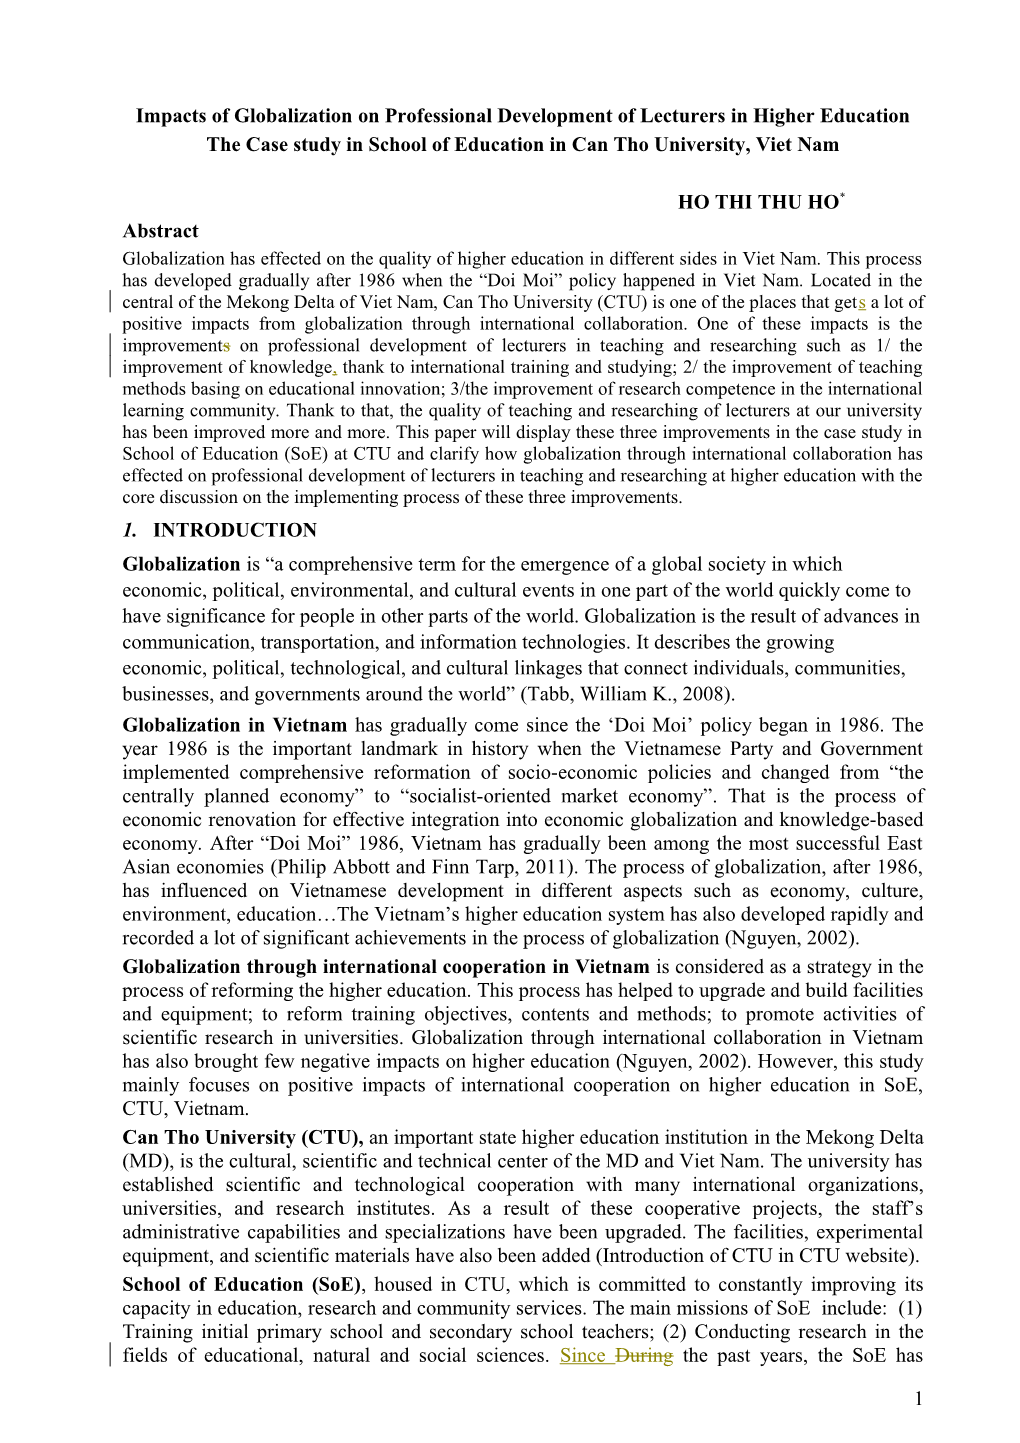 Effects of Globalization on Professional Development of Lecturers in Higher Education